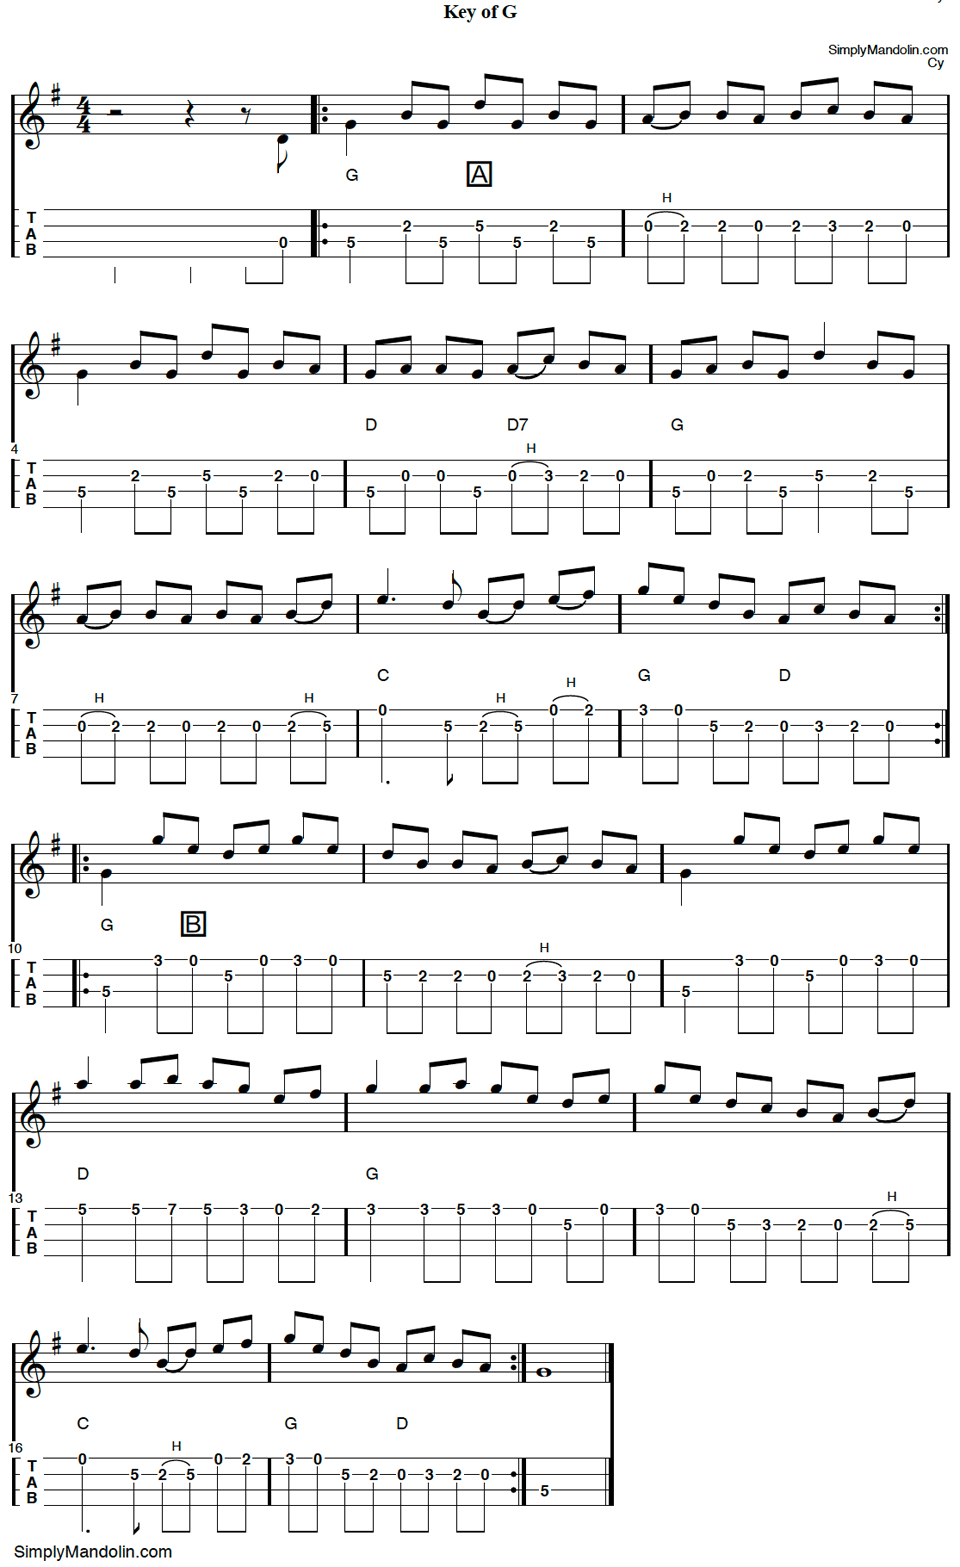 Image of mandolin tab for the Celtic tune "Miss Mcleod".